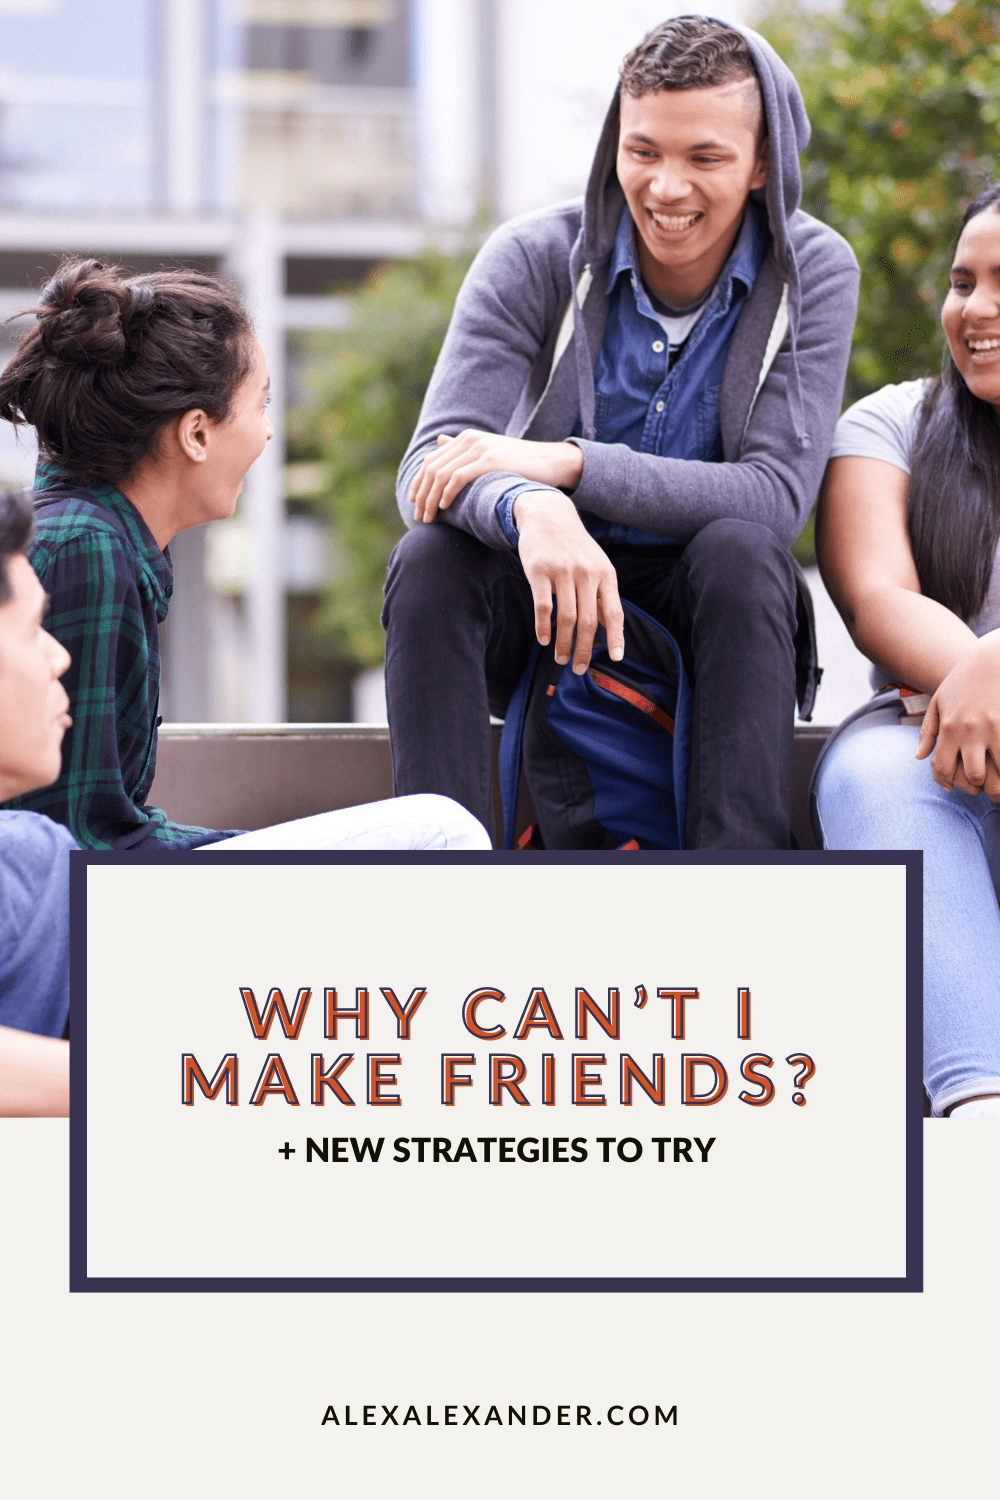 Why Can't I Make Friends? + New Strategies to Try - Image of a group of four friends in their 20s. A mix of male and female sitting on a set of concrete steps smiling and talking